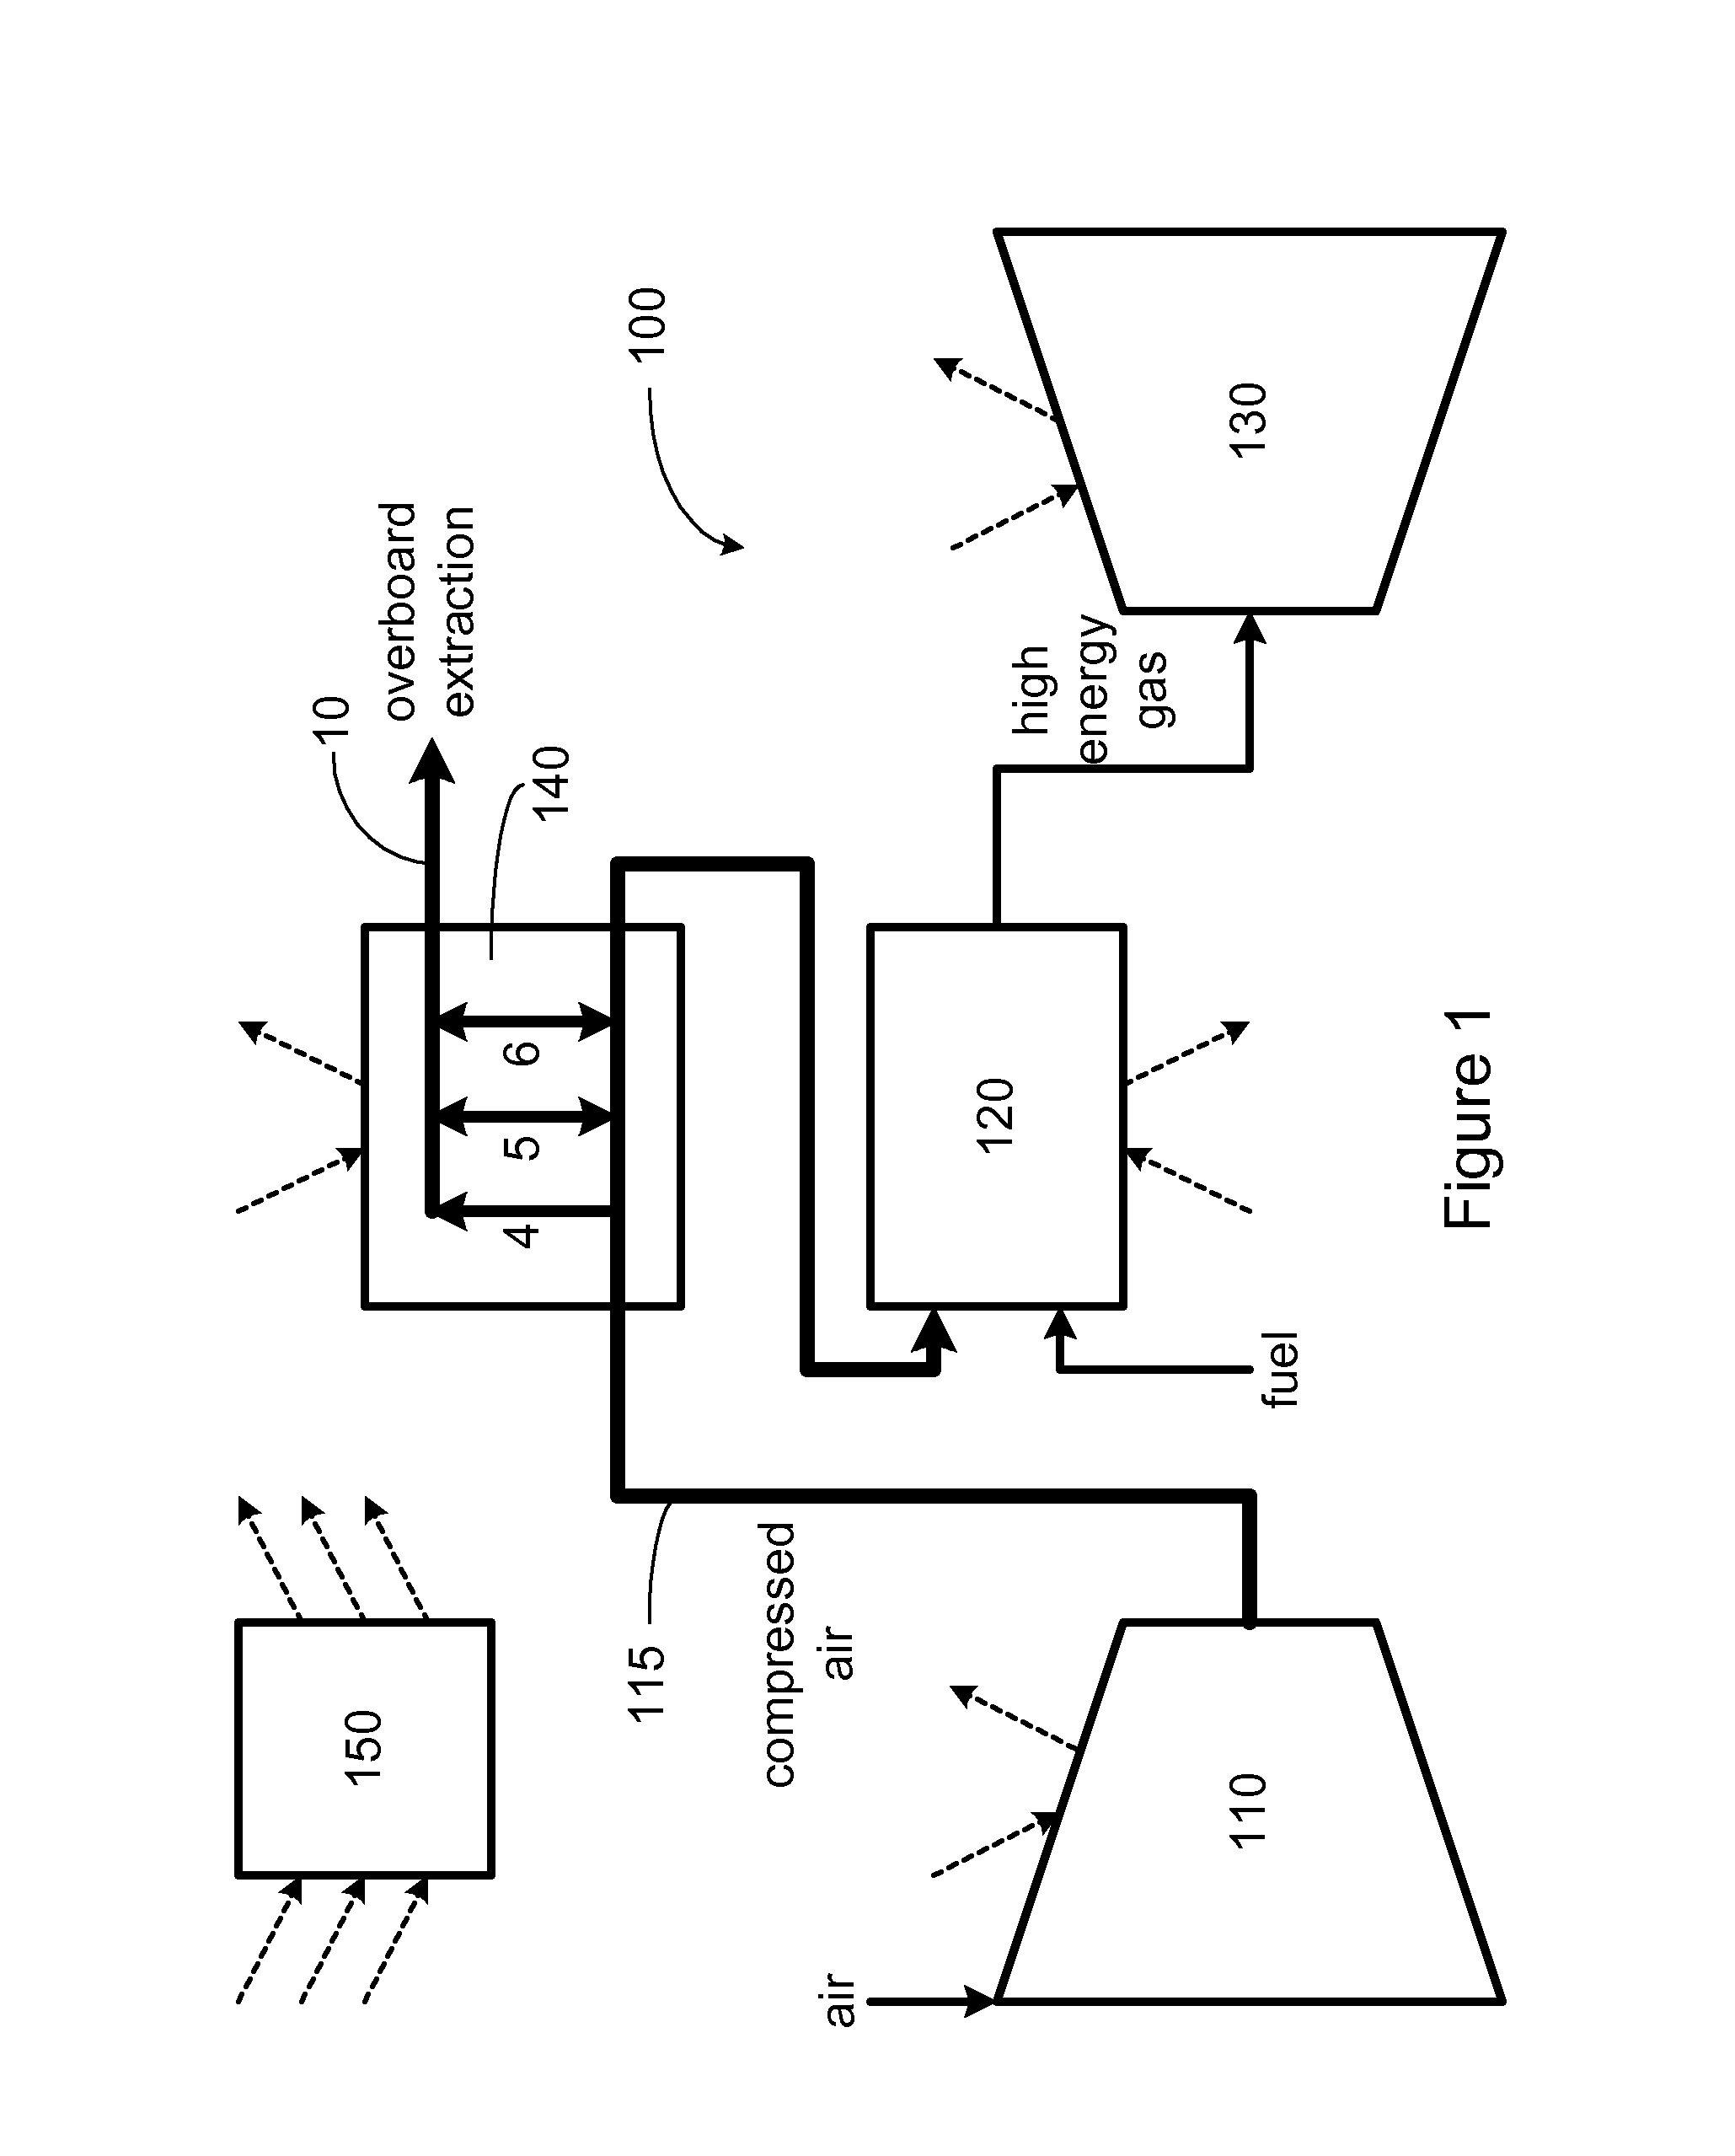 Multiple point overboard extractor for gas turbine